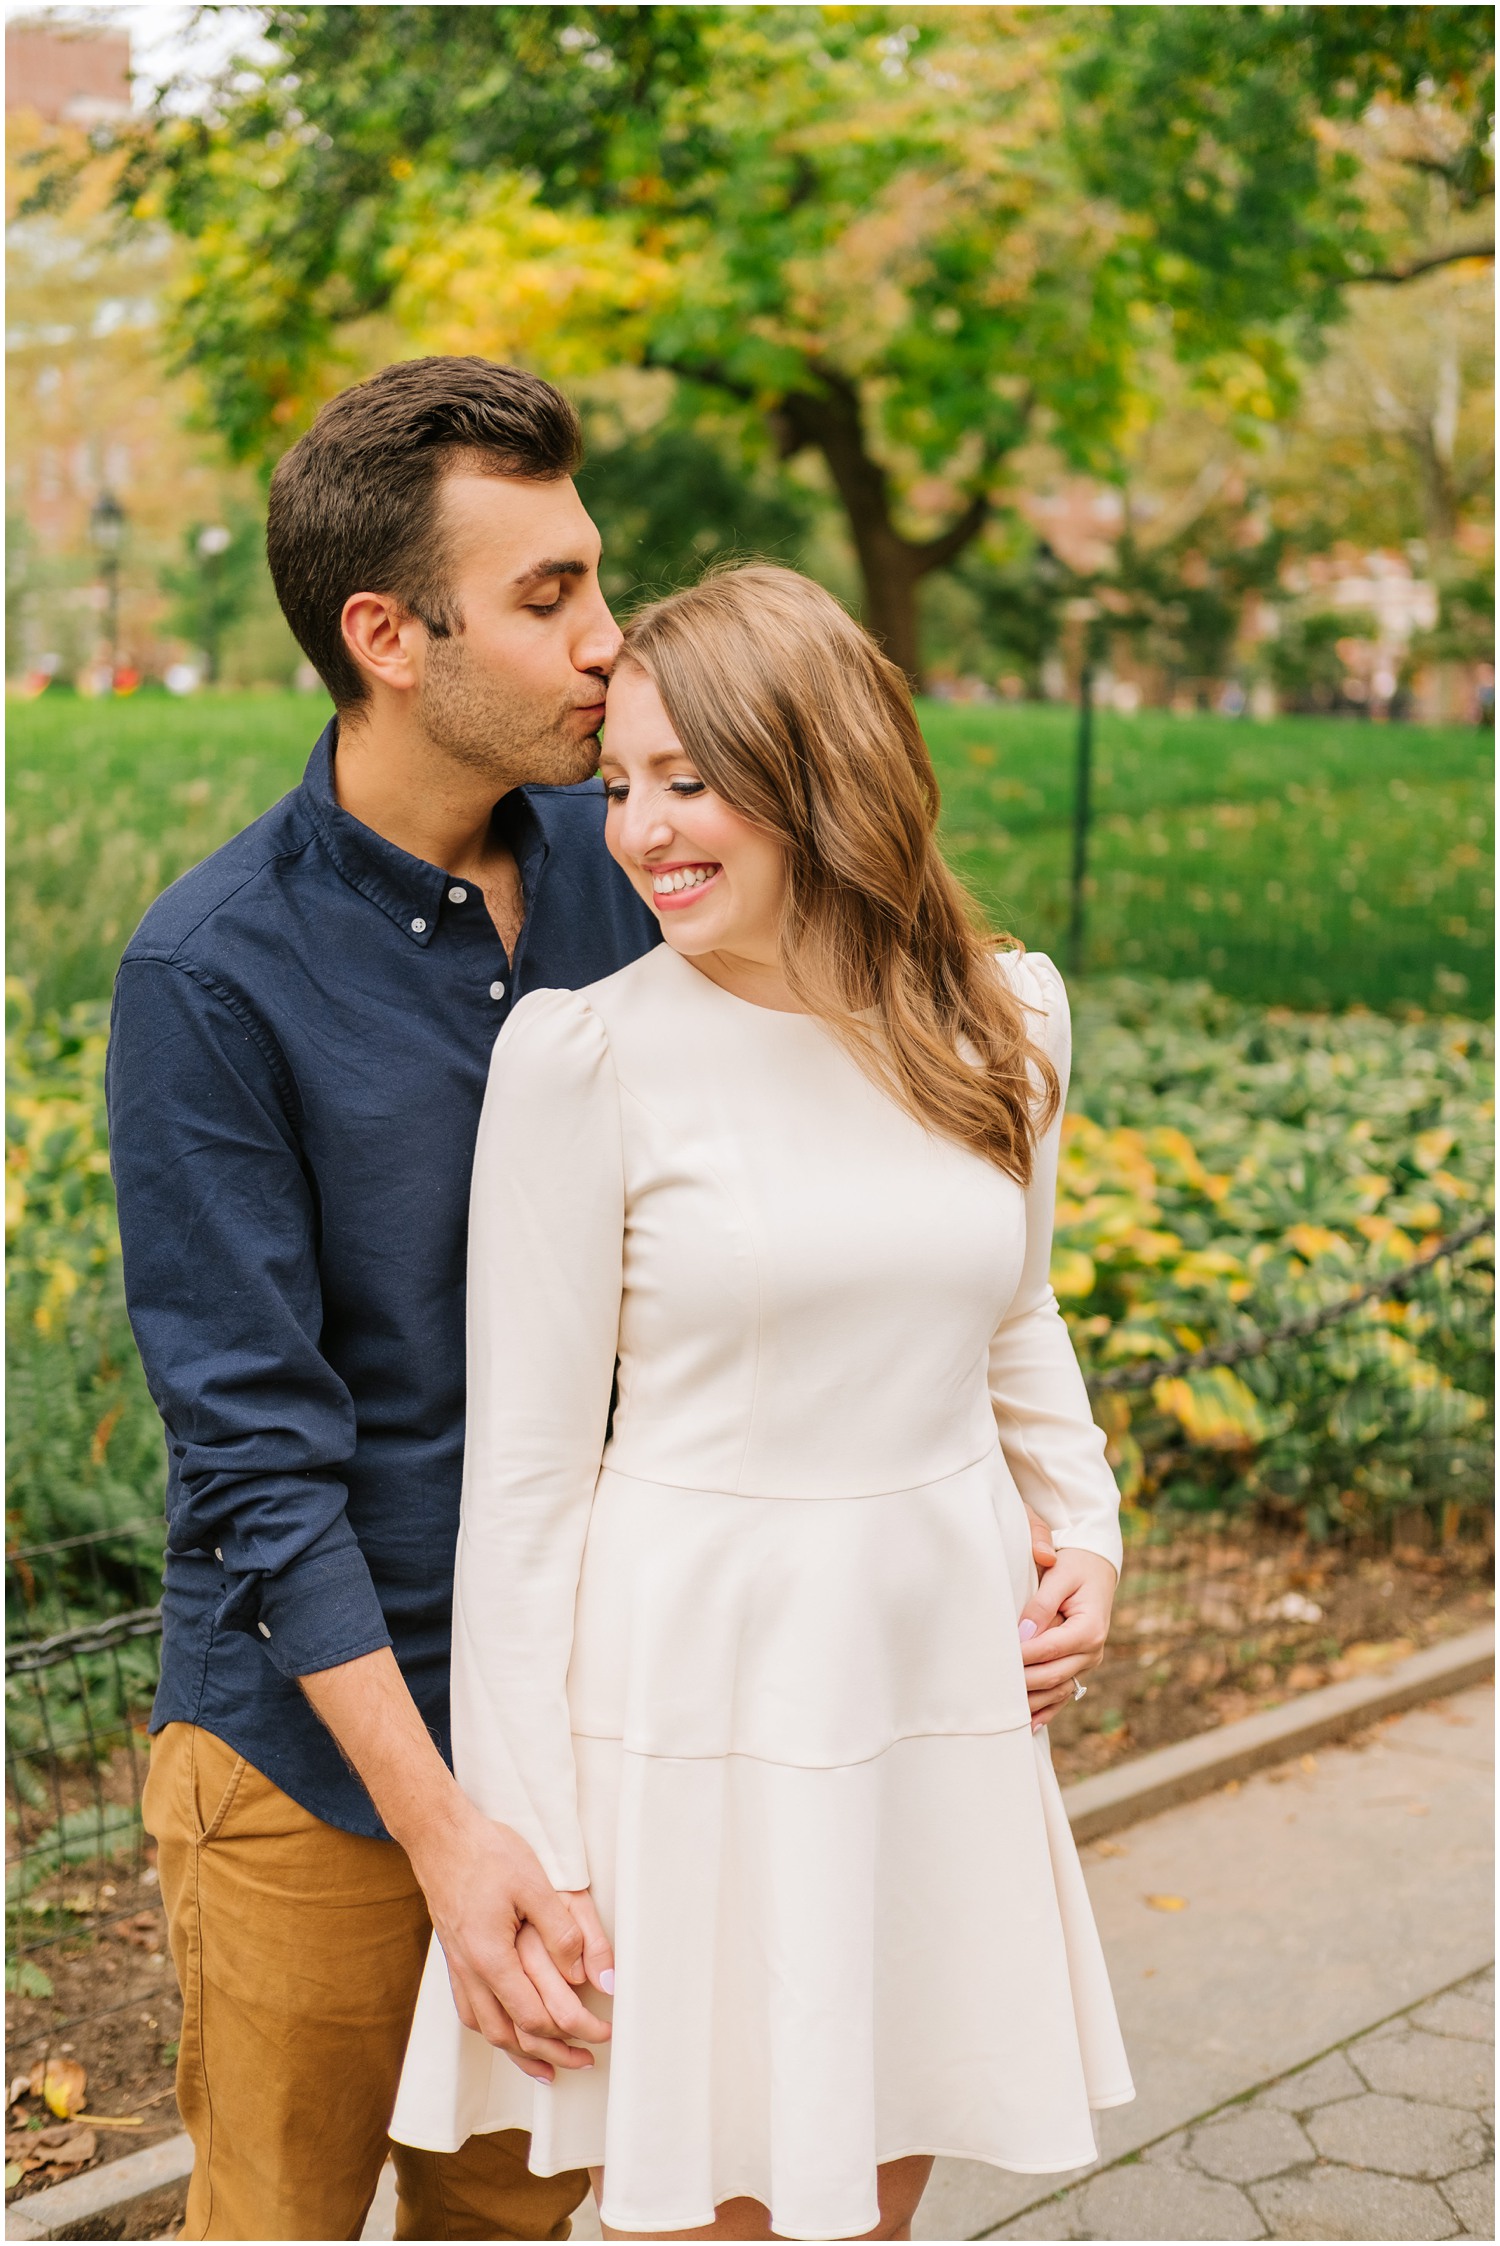 groom kisses bride in ecru dress during NYC engagement photos